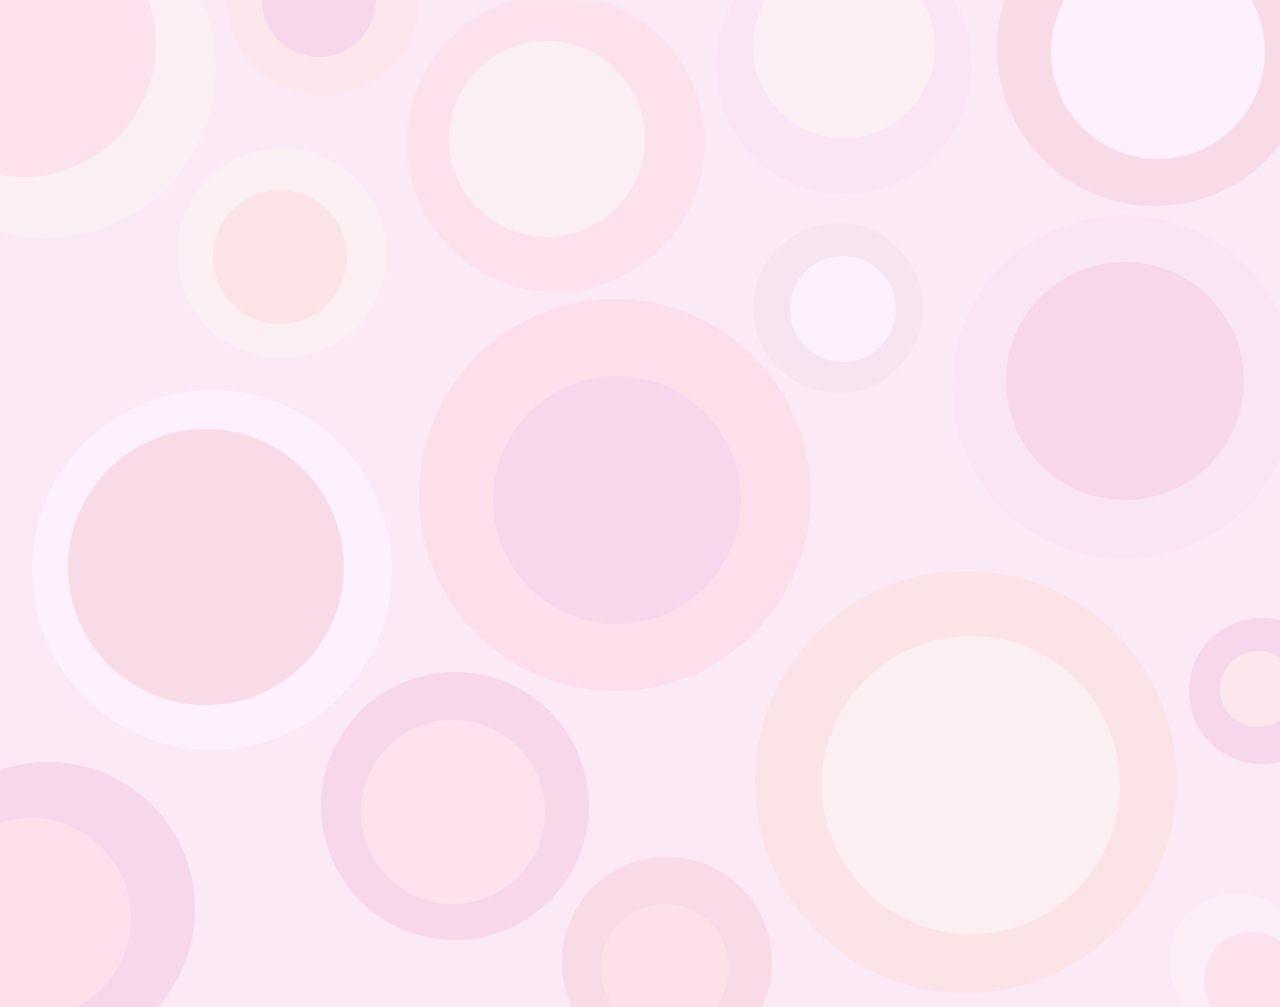 Wallpapers For > Plain Light Pink Backgrounds For Twitter